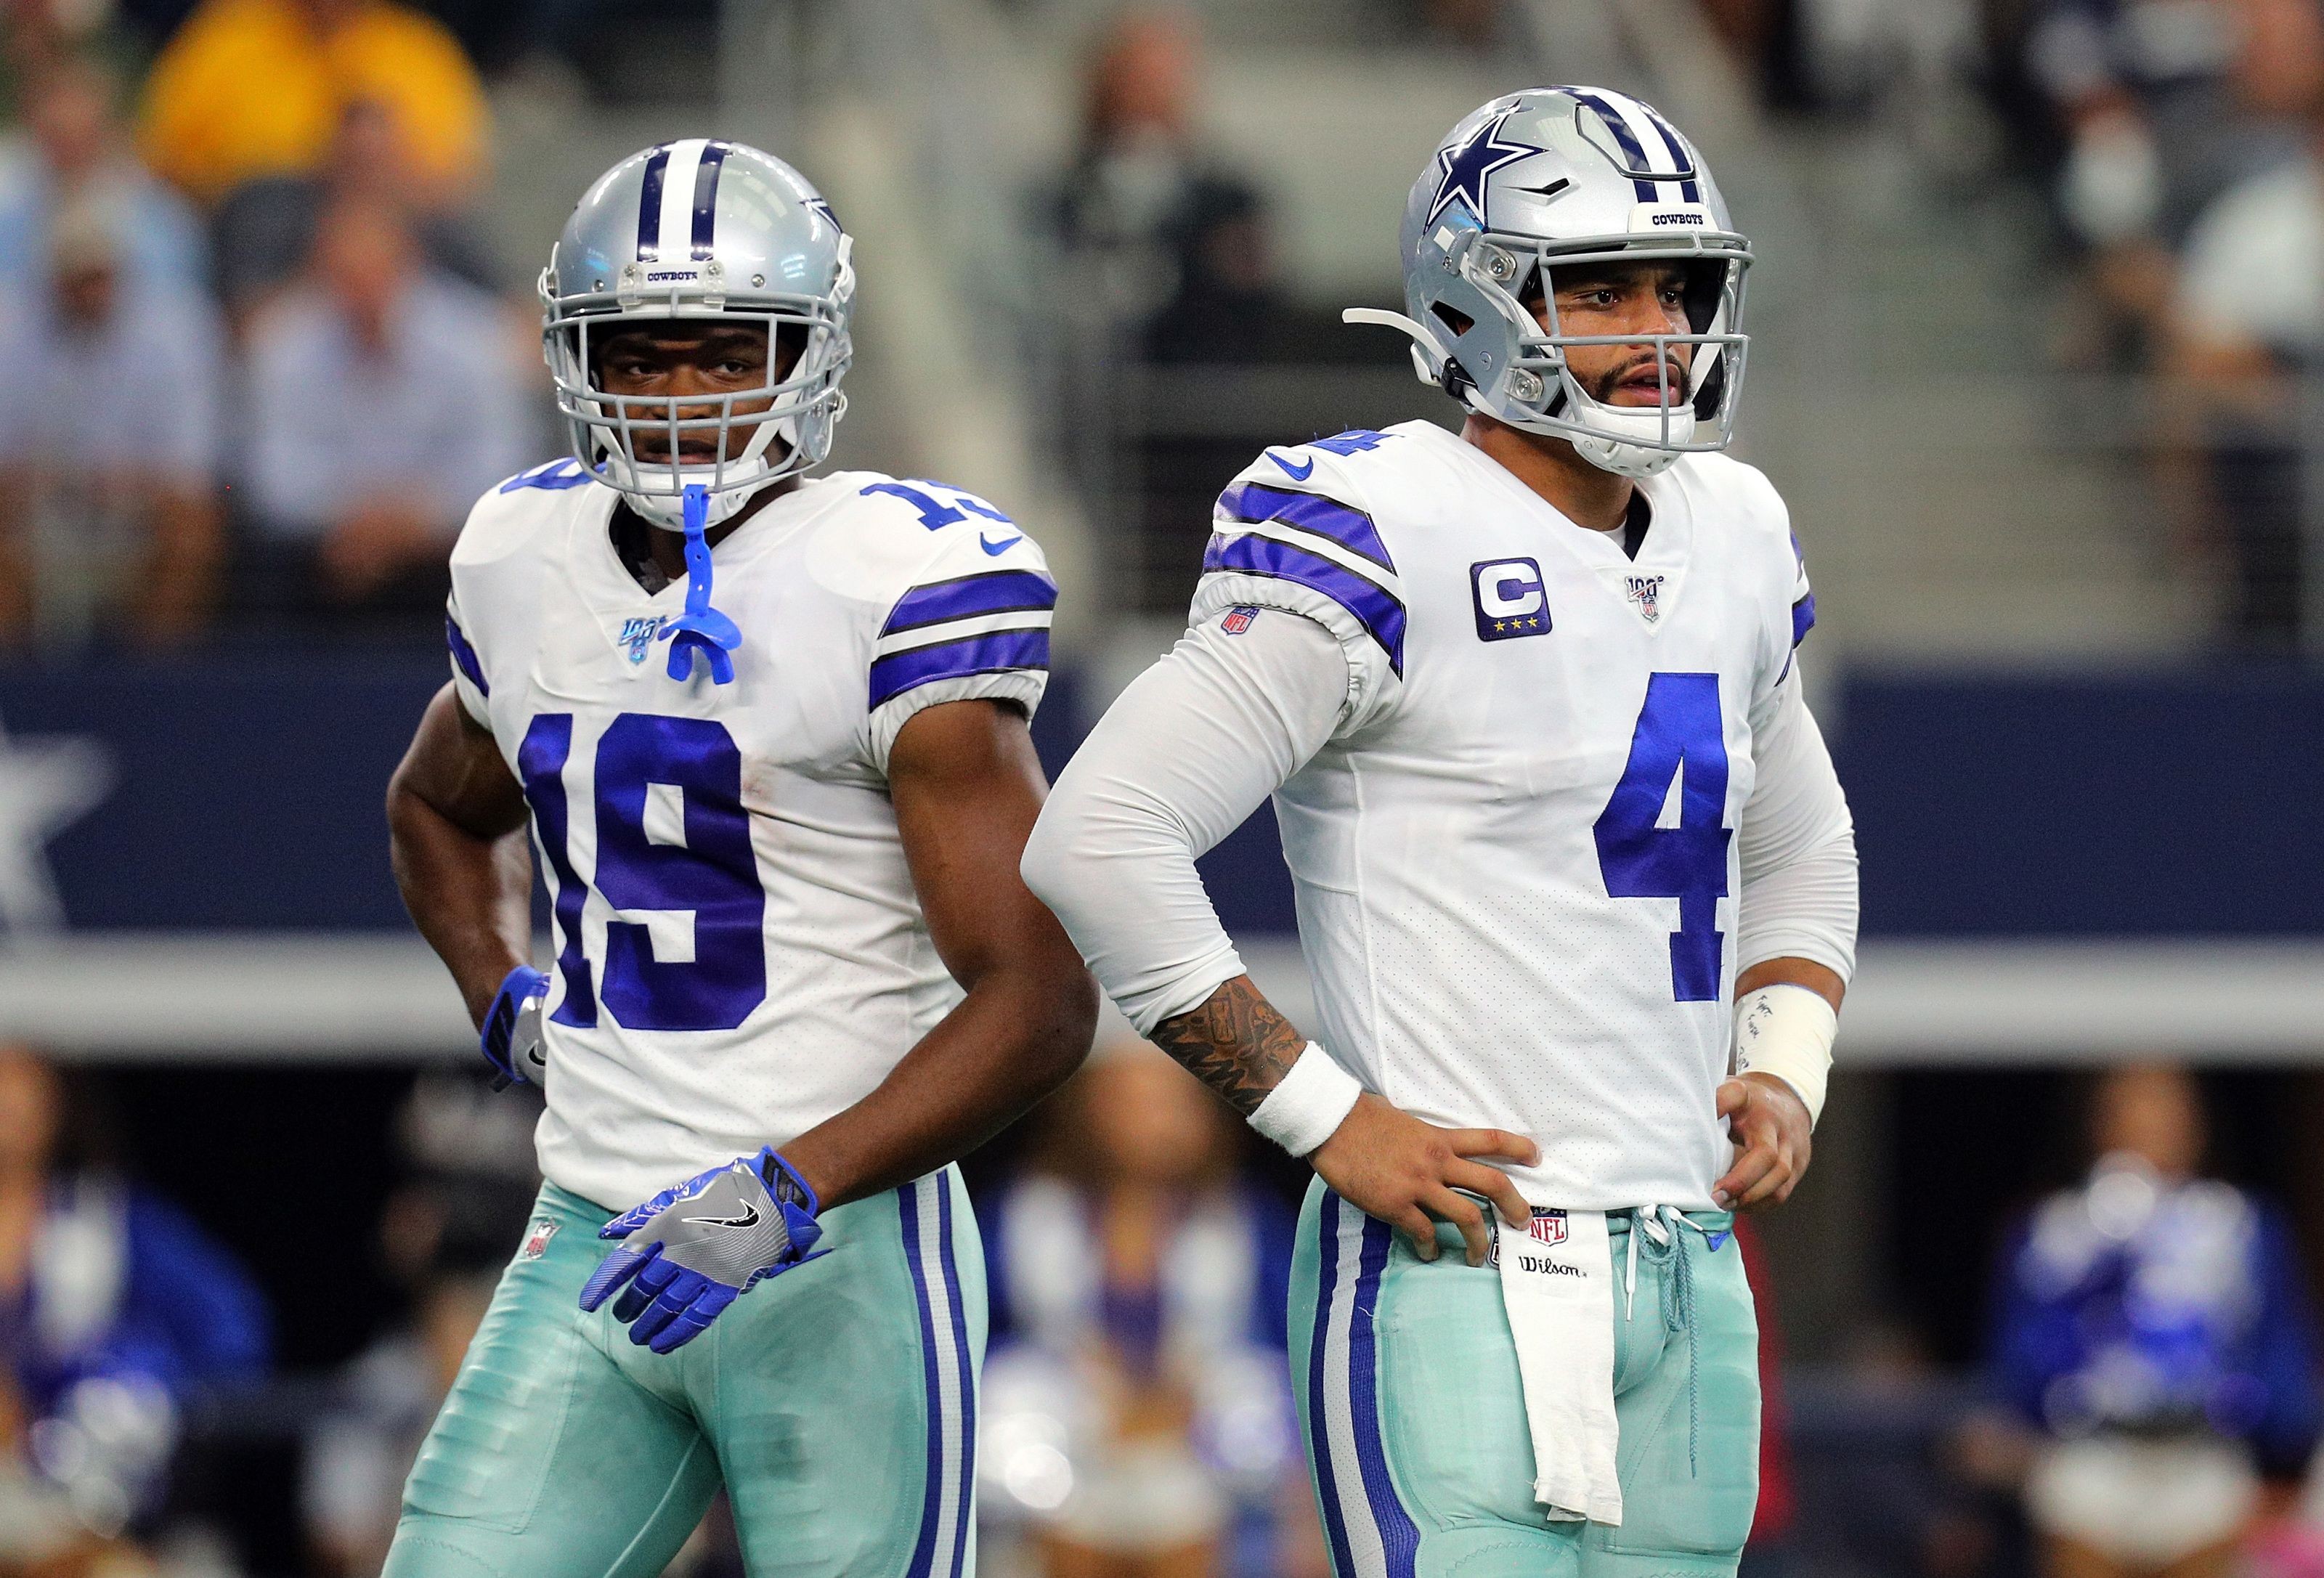 Dallas Cowboys own Pro Bowlers the weakest link against Green Bay